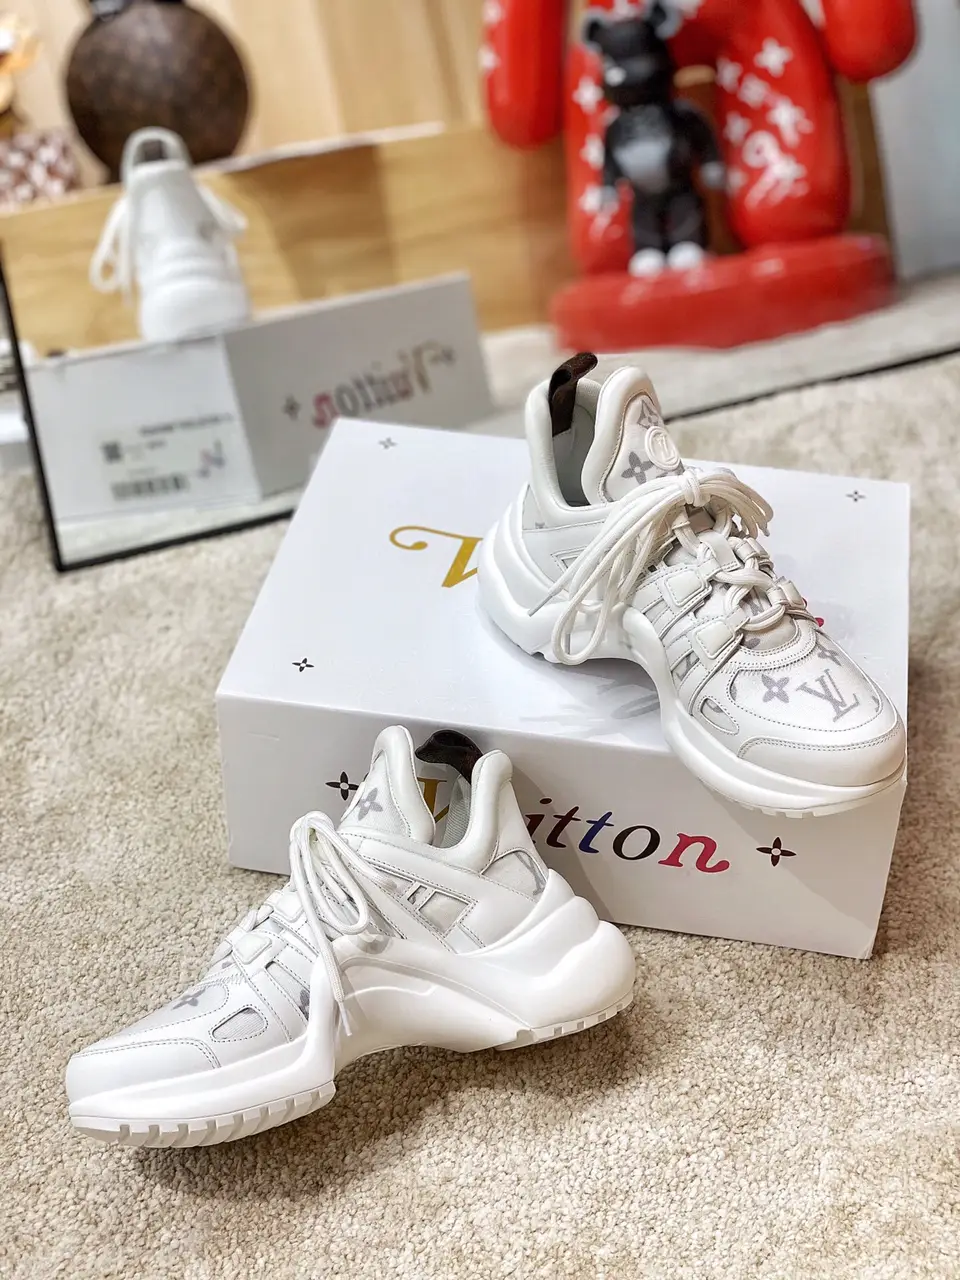 Louis Vuitton Archlight  Light sneakers, Sneakers, Me too shoes